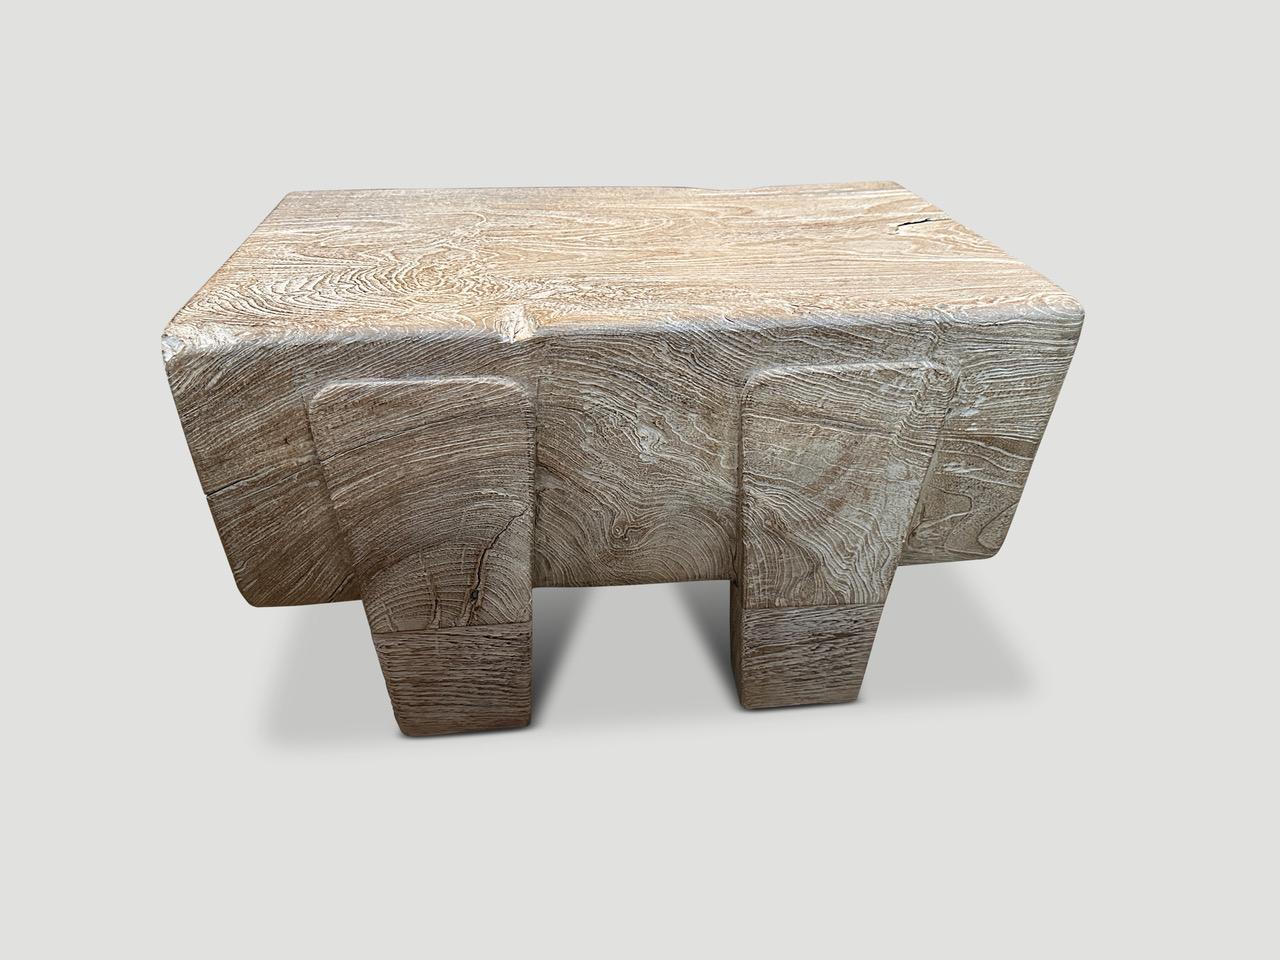 Organic Modern Andrianna Shamaris Minimalist Small Coffee Table, Side Table or Bench For Sale